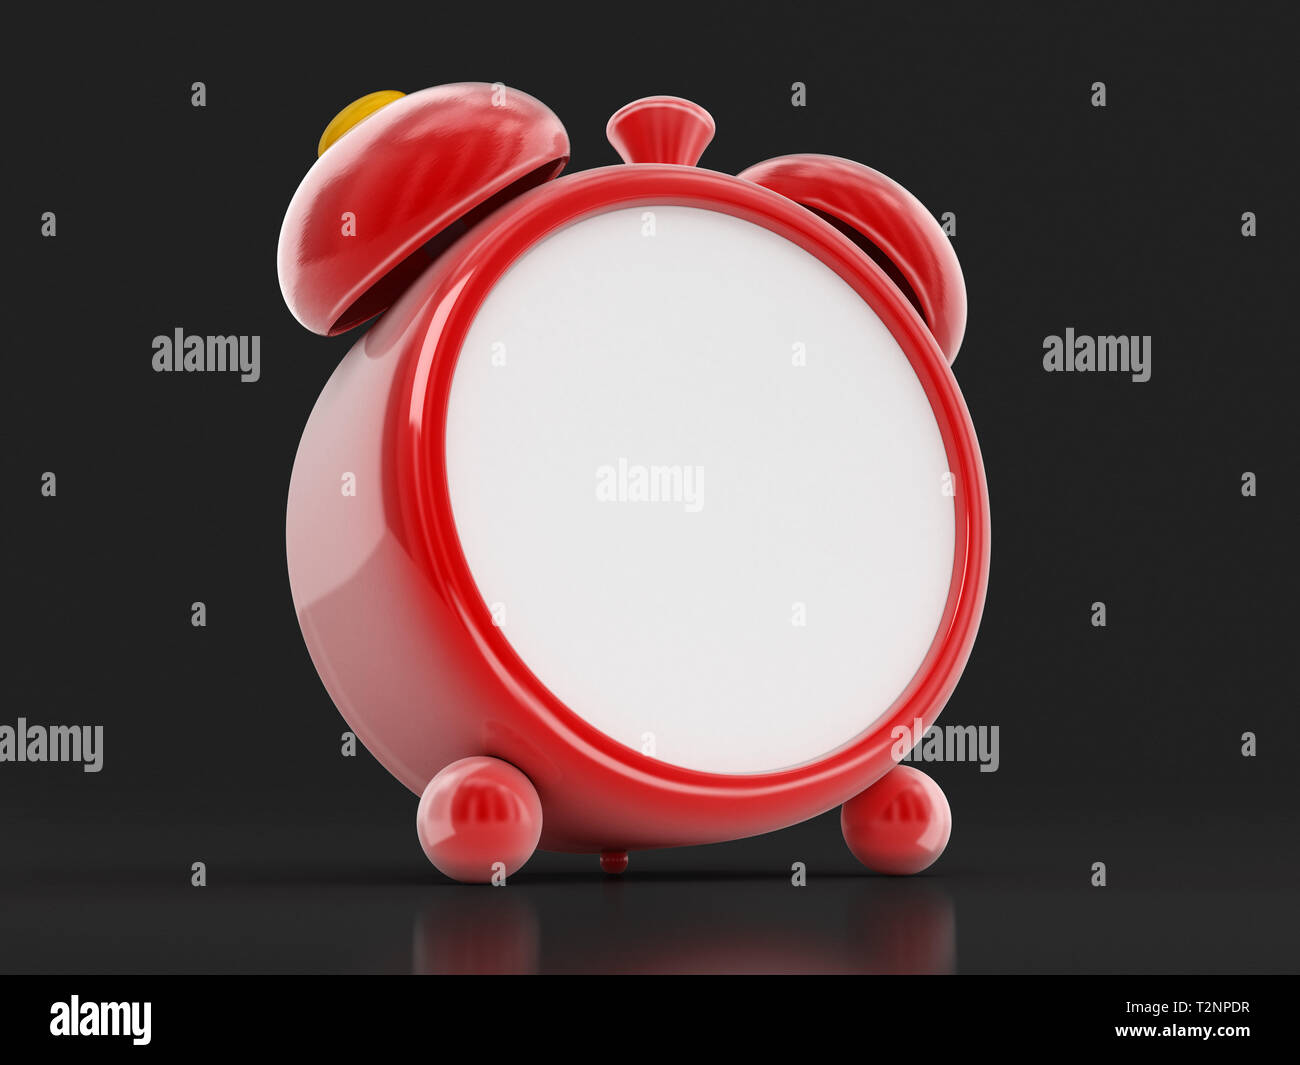 Alarm Clock. Image with clipping path Stock Photo